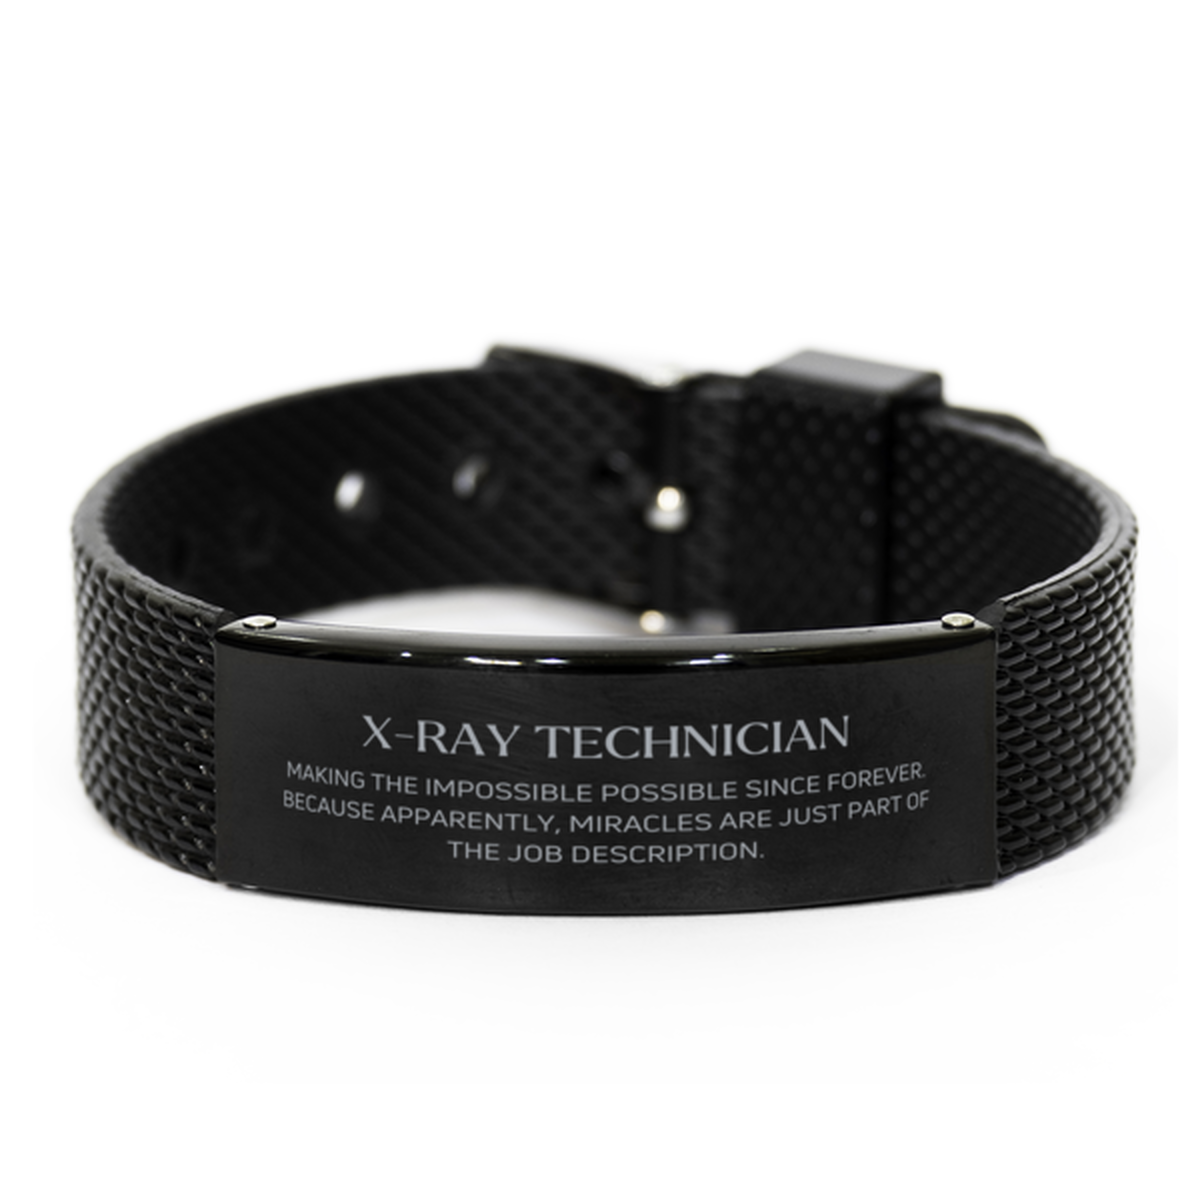 Funny X-Ray Technician Gifts, Miracles are just part of the job description, Inspirational Birthday Black Shark Mesh Bracelet For X-Ray Technician, Men, Women, Coworkers, Friends, Boss